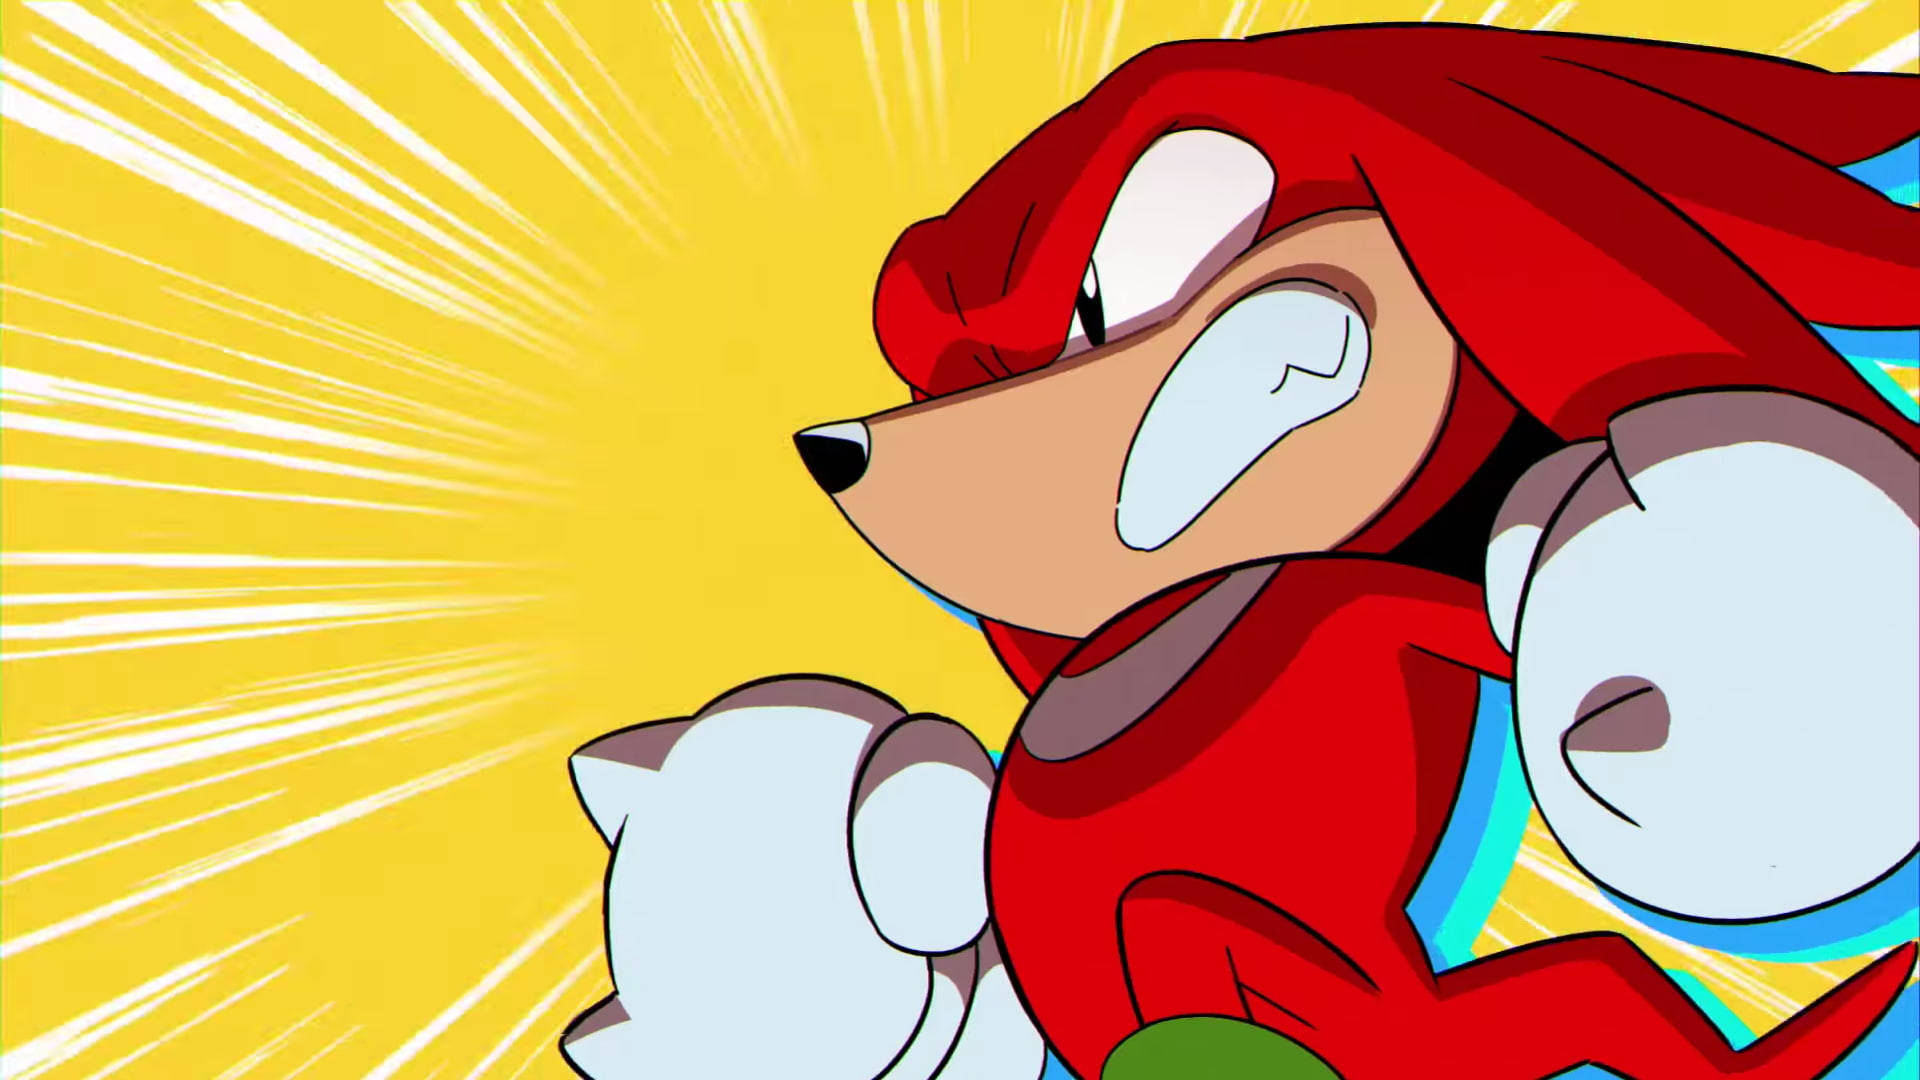 Knuckles the Echidna in a Dynamic Pose Against a Vibrant Yellow Background Wallpaper